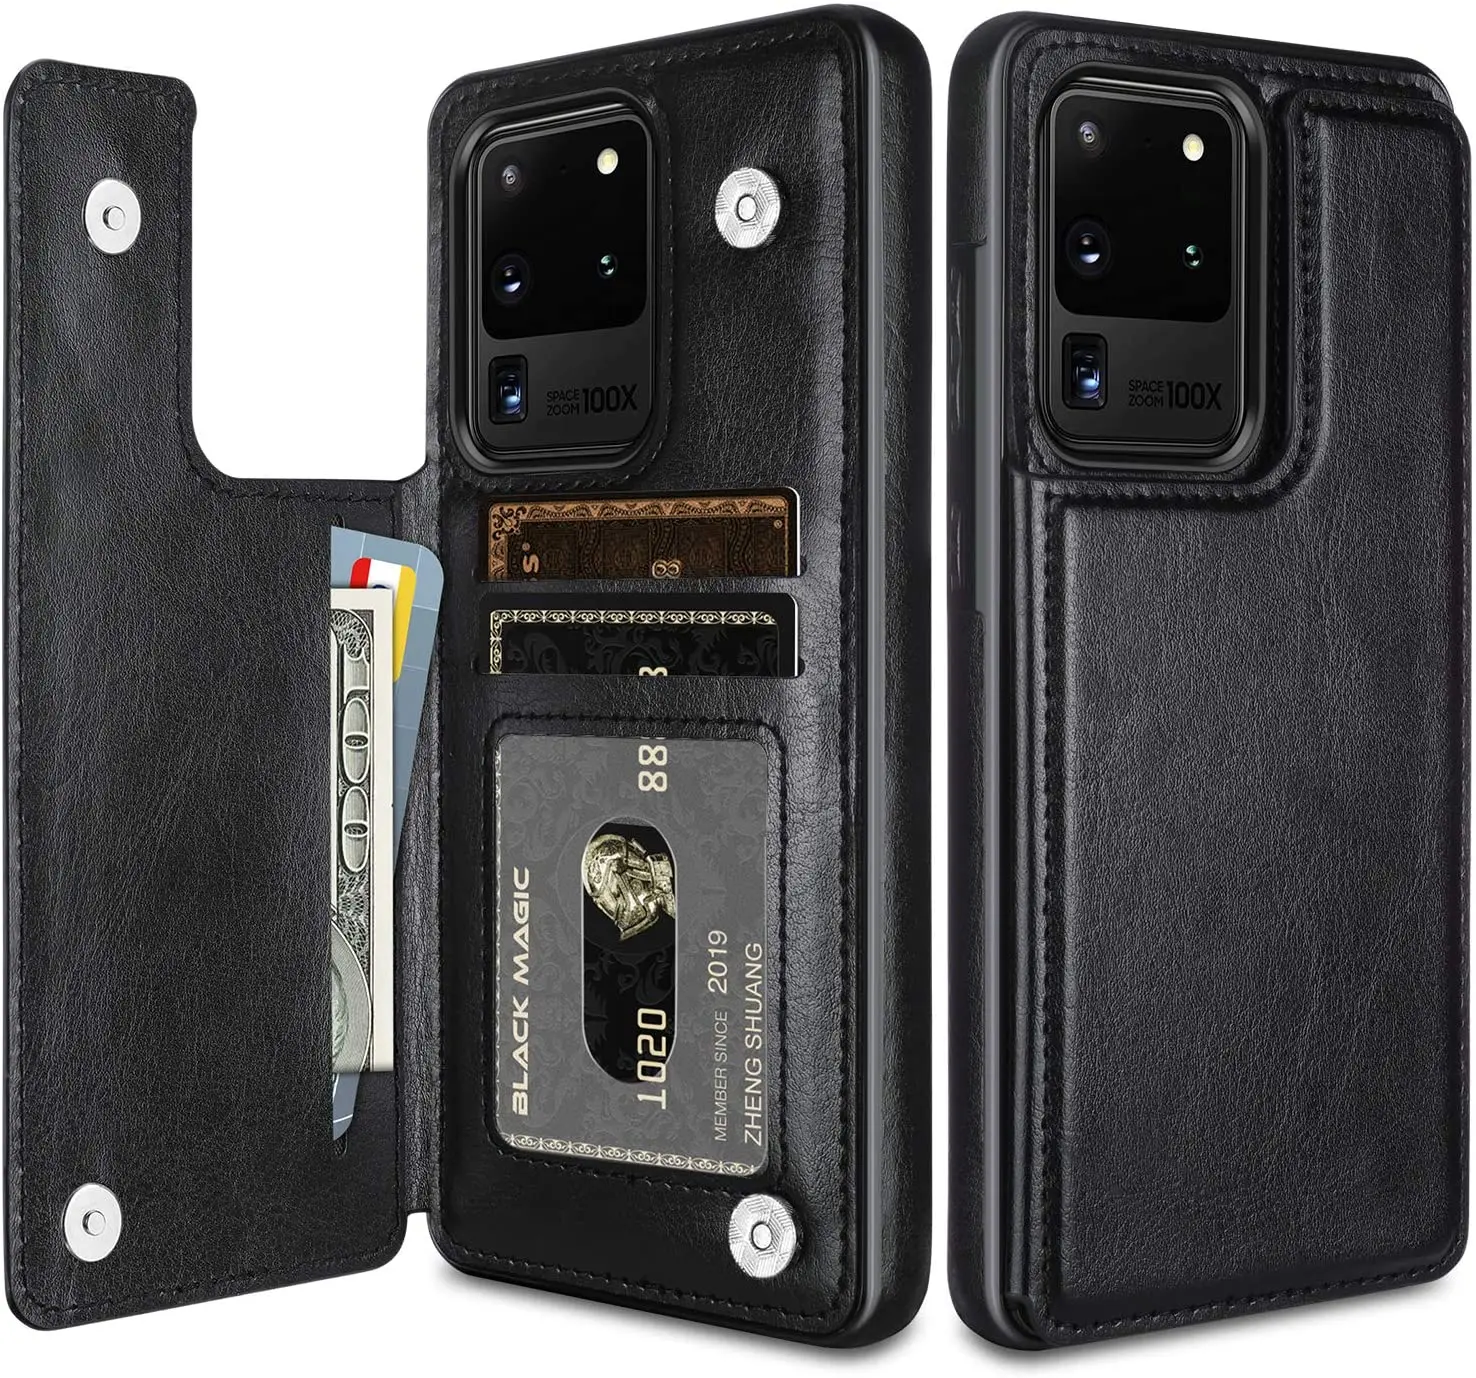 Luxury Slim Fit Premium Leather Card Slots Shockproof Flip Wallet Case for Samsung Galaxy S20 | S10 & Note 10 Series